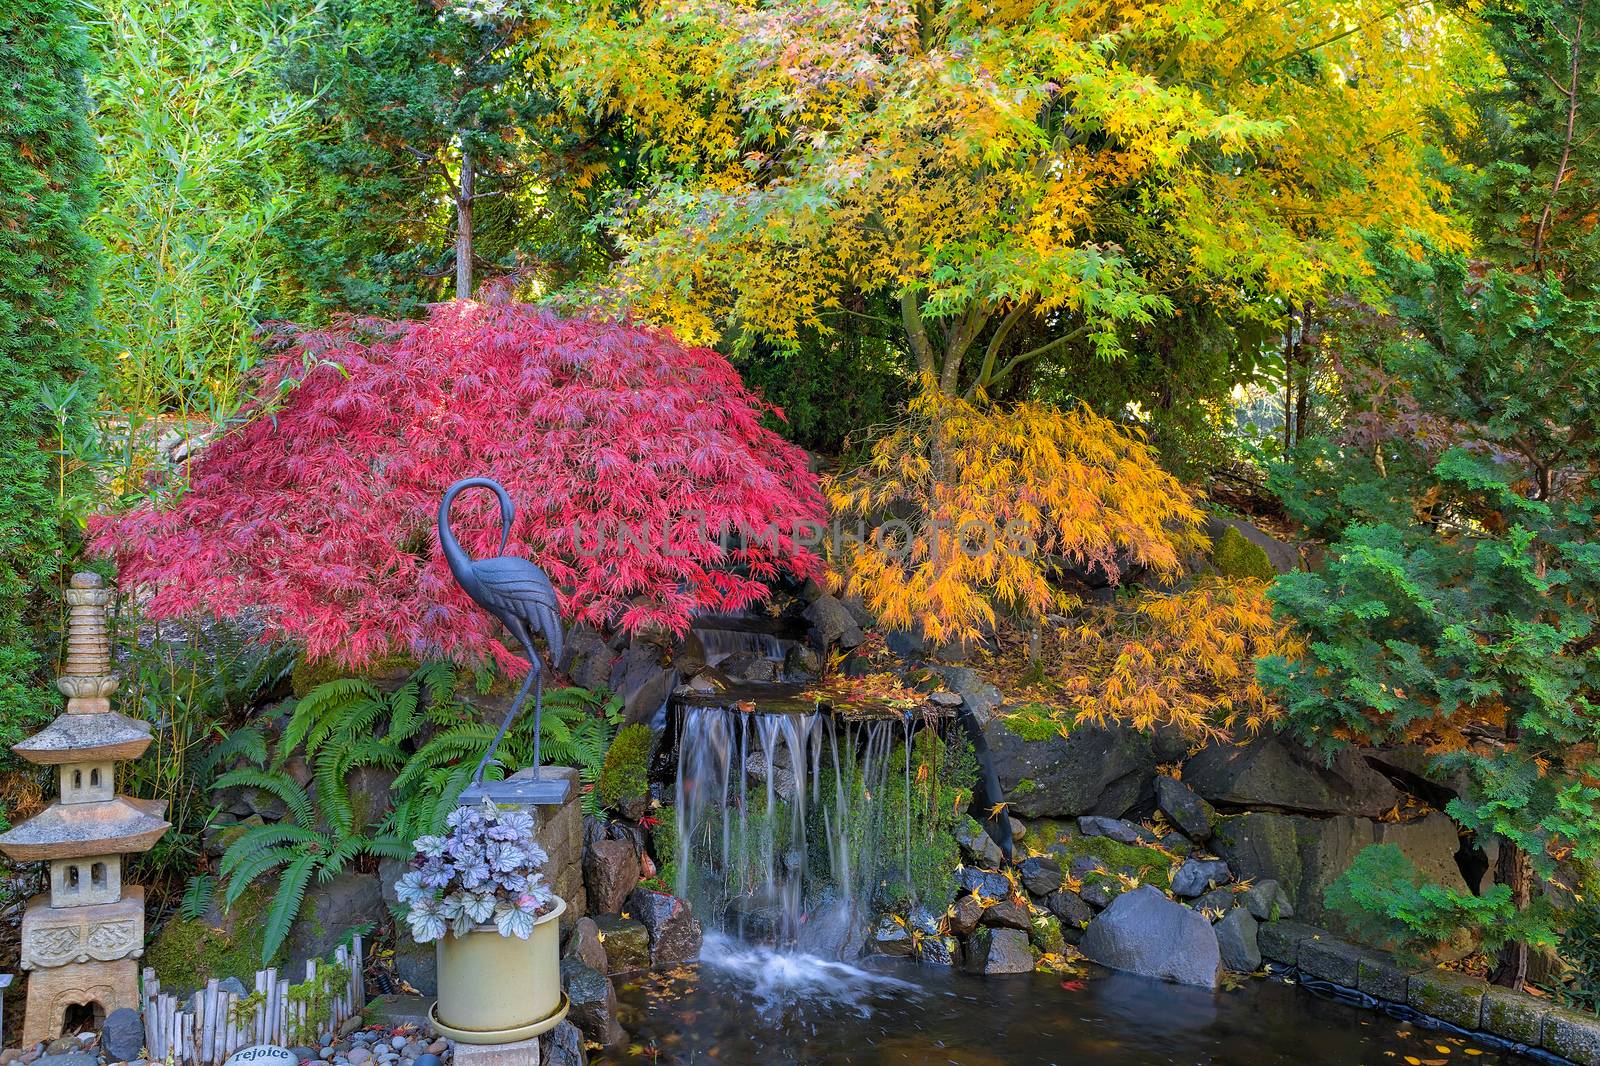 Home garden backyard waterfall pond with maple trees bamboo decor in fall season color